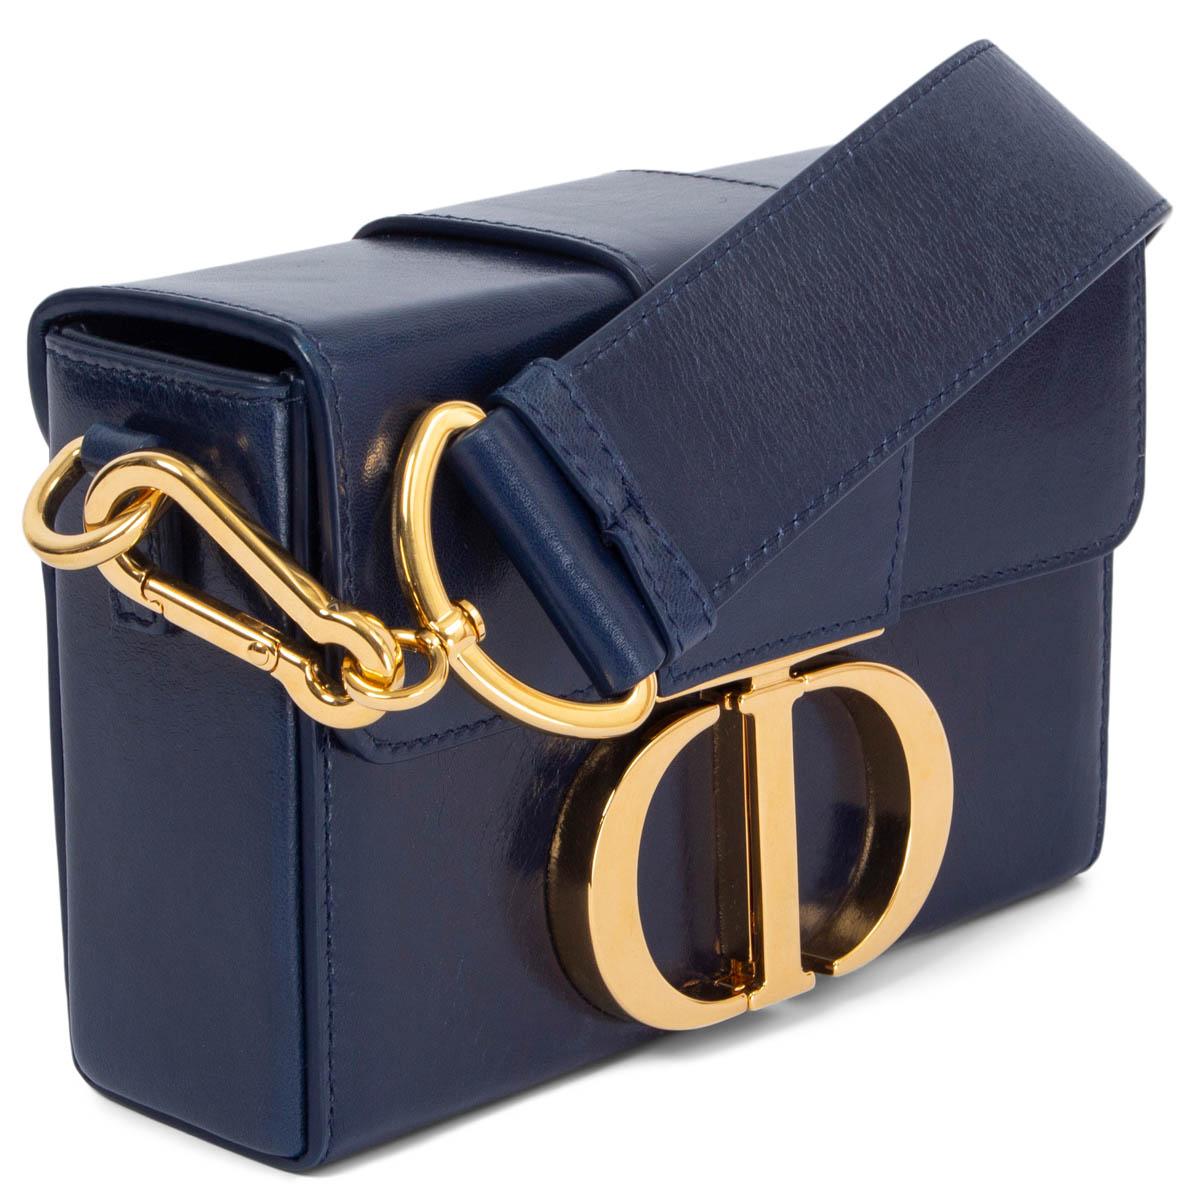 100% authentic Christian Dior 30 Montaigne Box crossbody bag in softly wrinckled navy box calfskin. The flap has an antique gold-finish metal 'CD' clasp, inspired by the seal of a Christian Dior perfume bottle. Embossed '30 MONTAIGNE' signature at